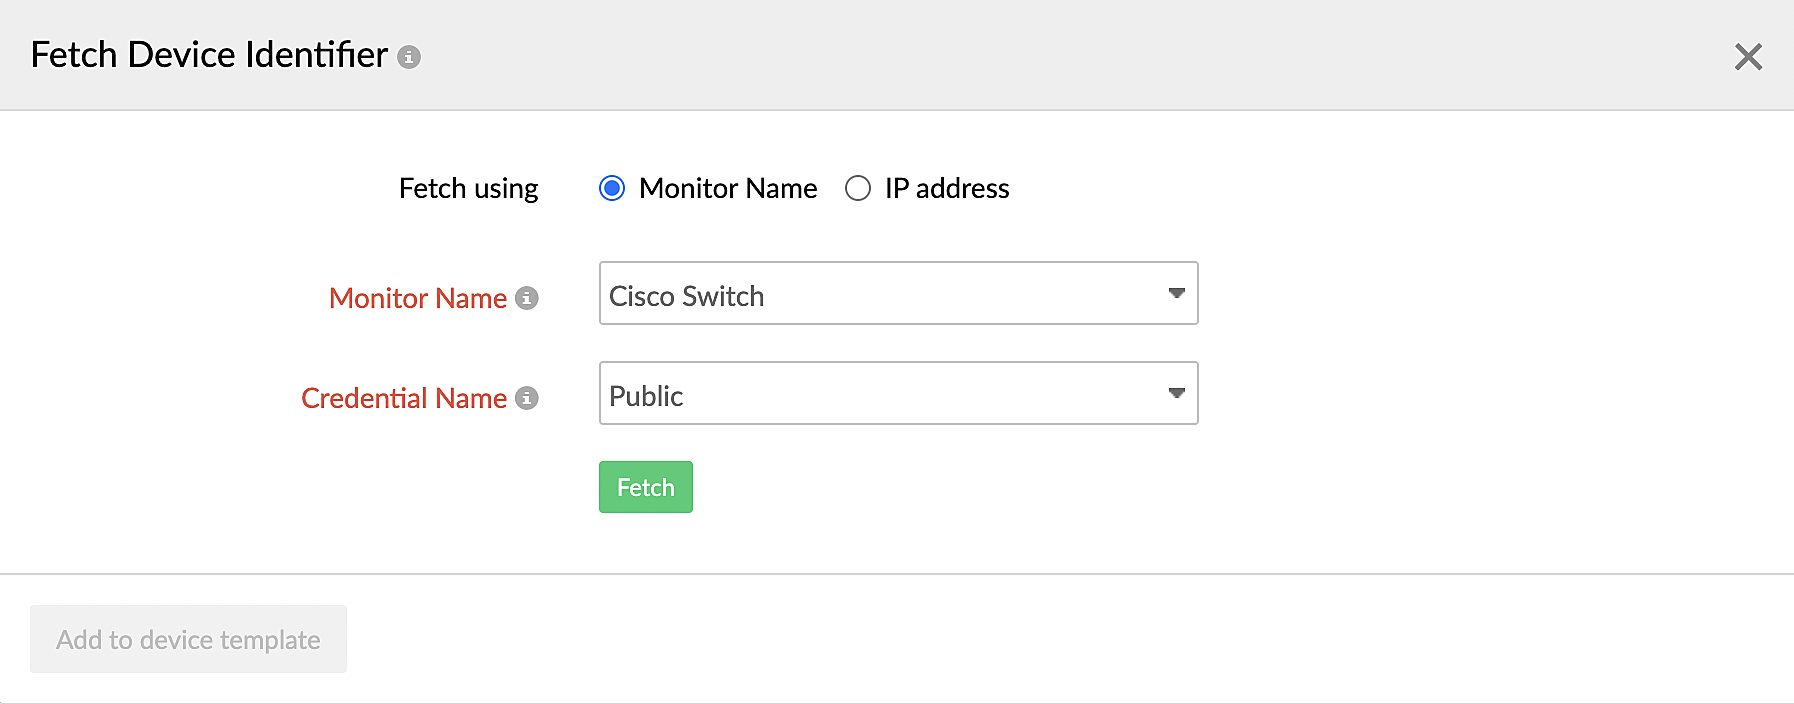 Fetching device identifiers with the monitor name